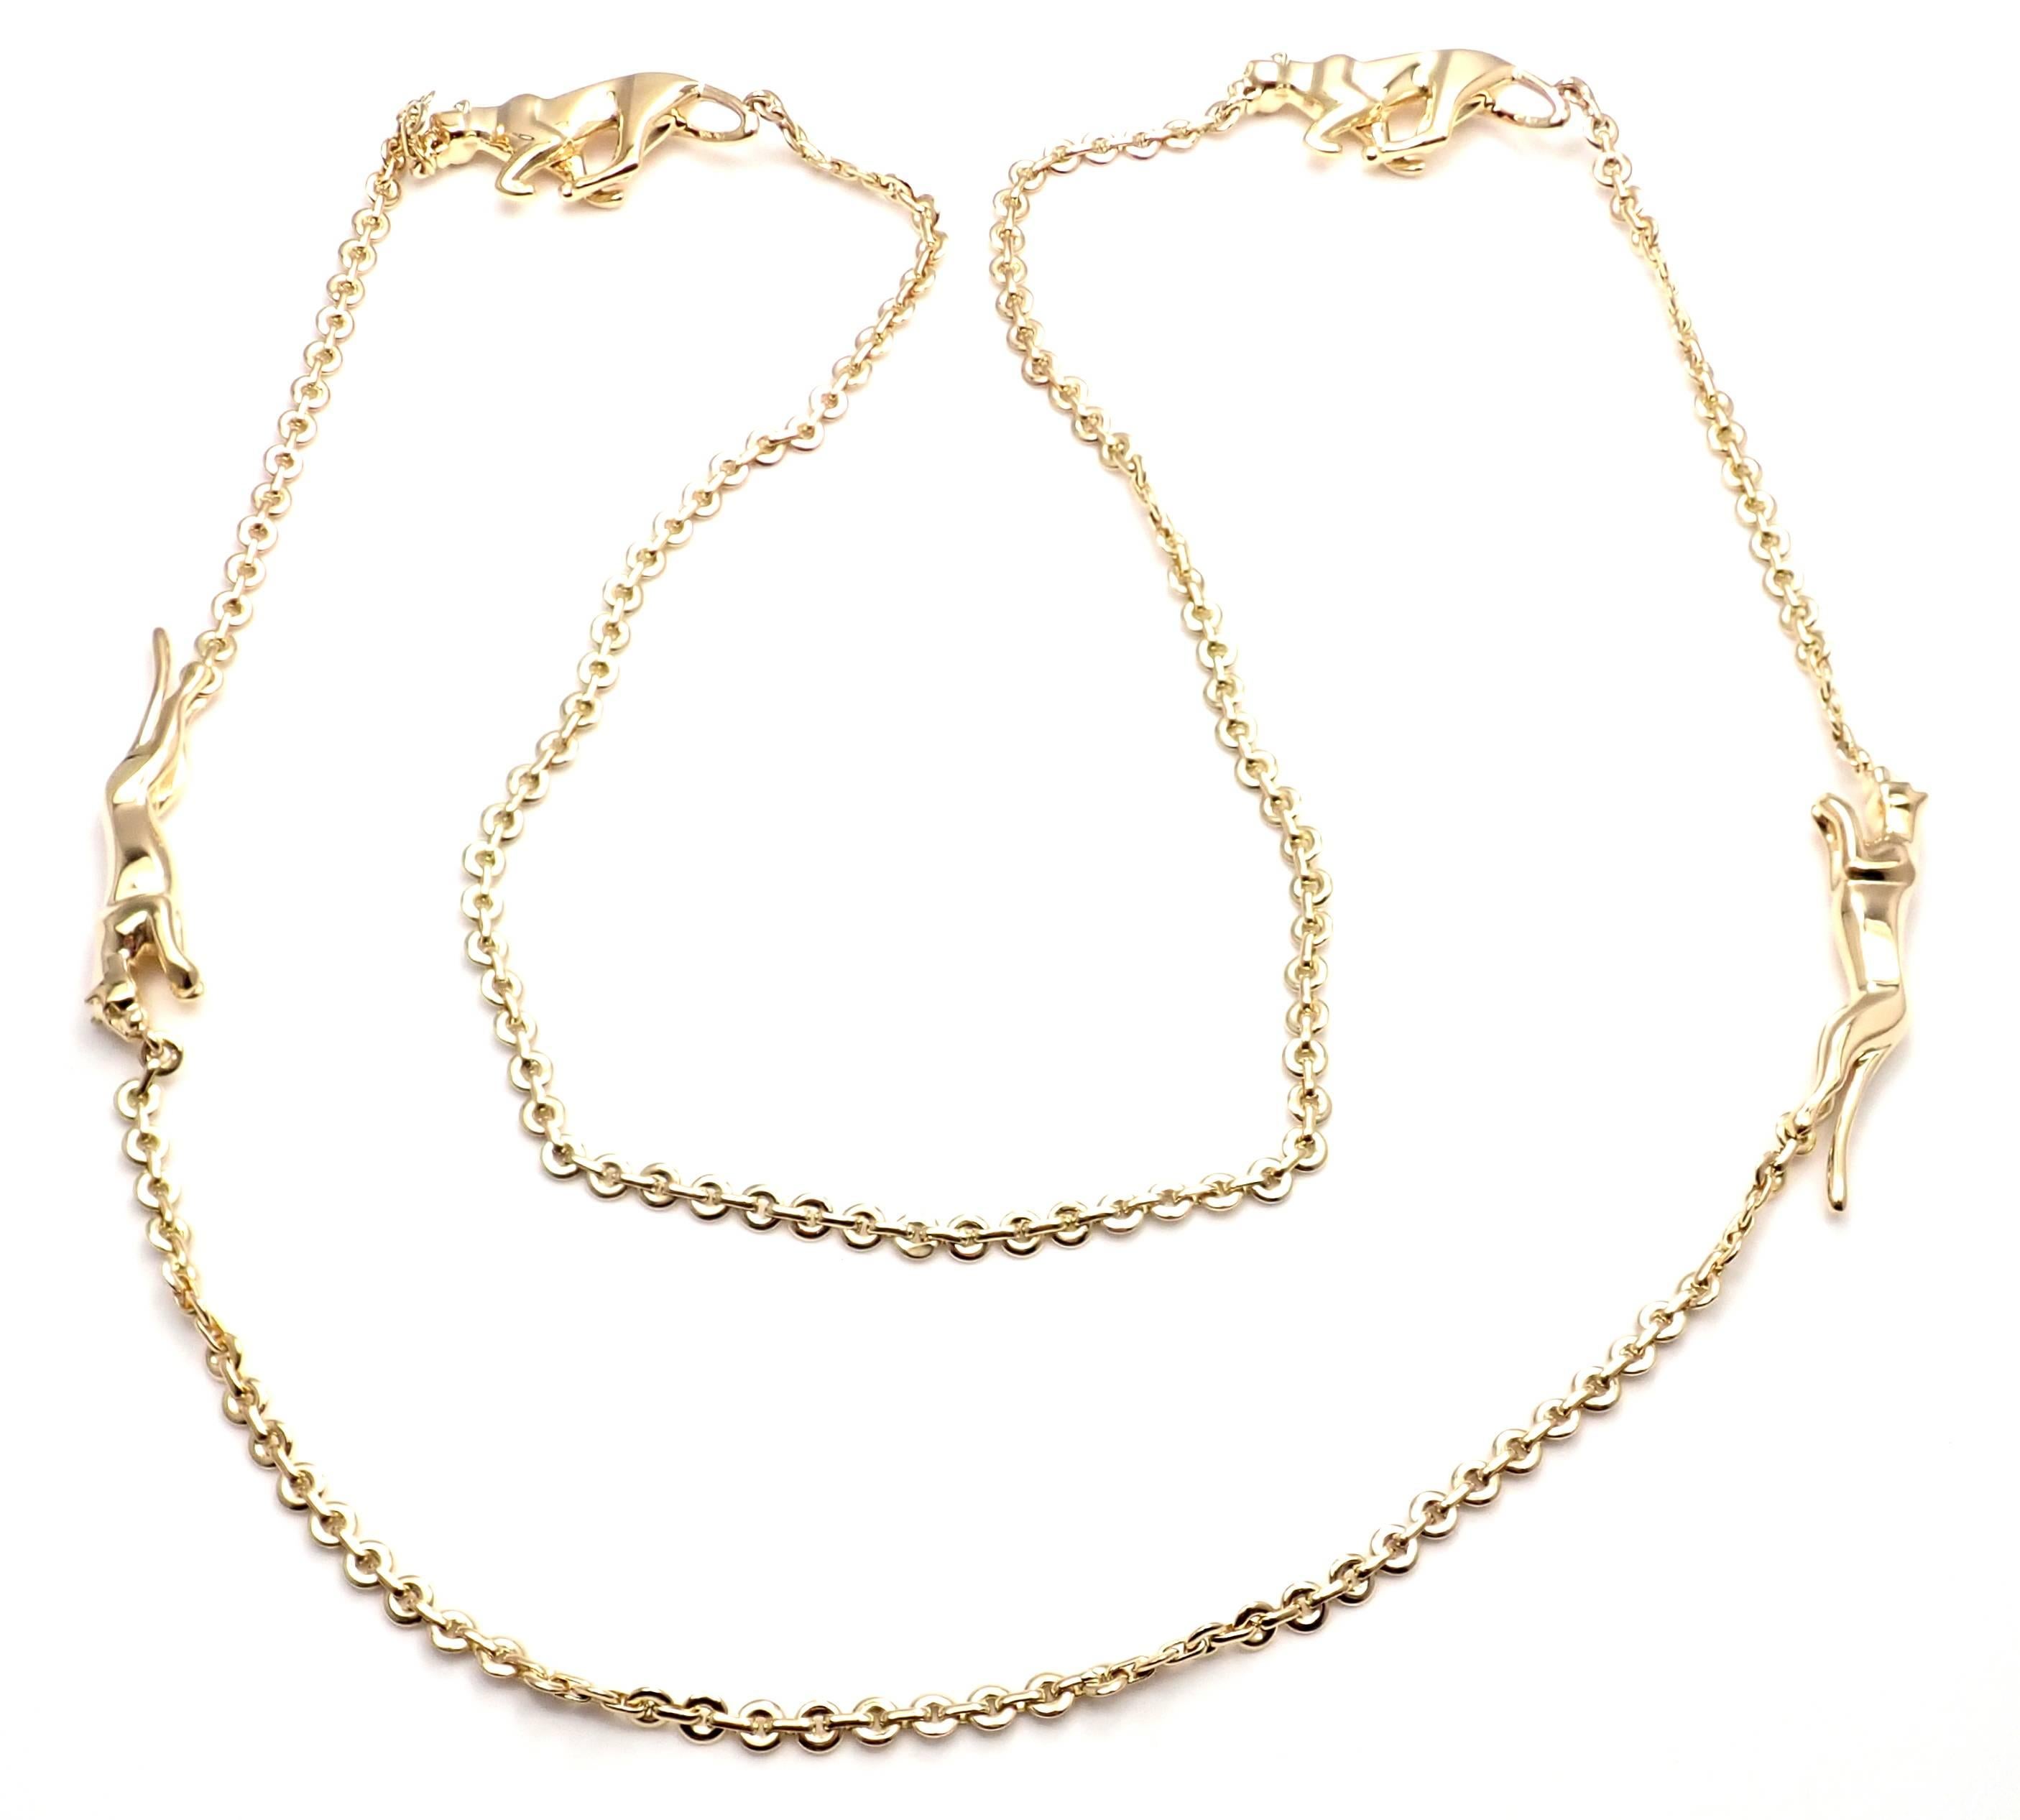 18k Yellow Gold 4 Panther Panthere Link Chain Necklace by Cartier. 
With 4 Panthers: 47mm x 9mm and 37mm x 15mm
This necklace comes with original Cartier box and Cartier certificate from 1989.
Details:
Length 34